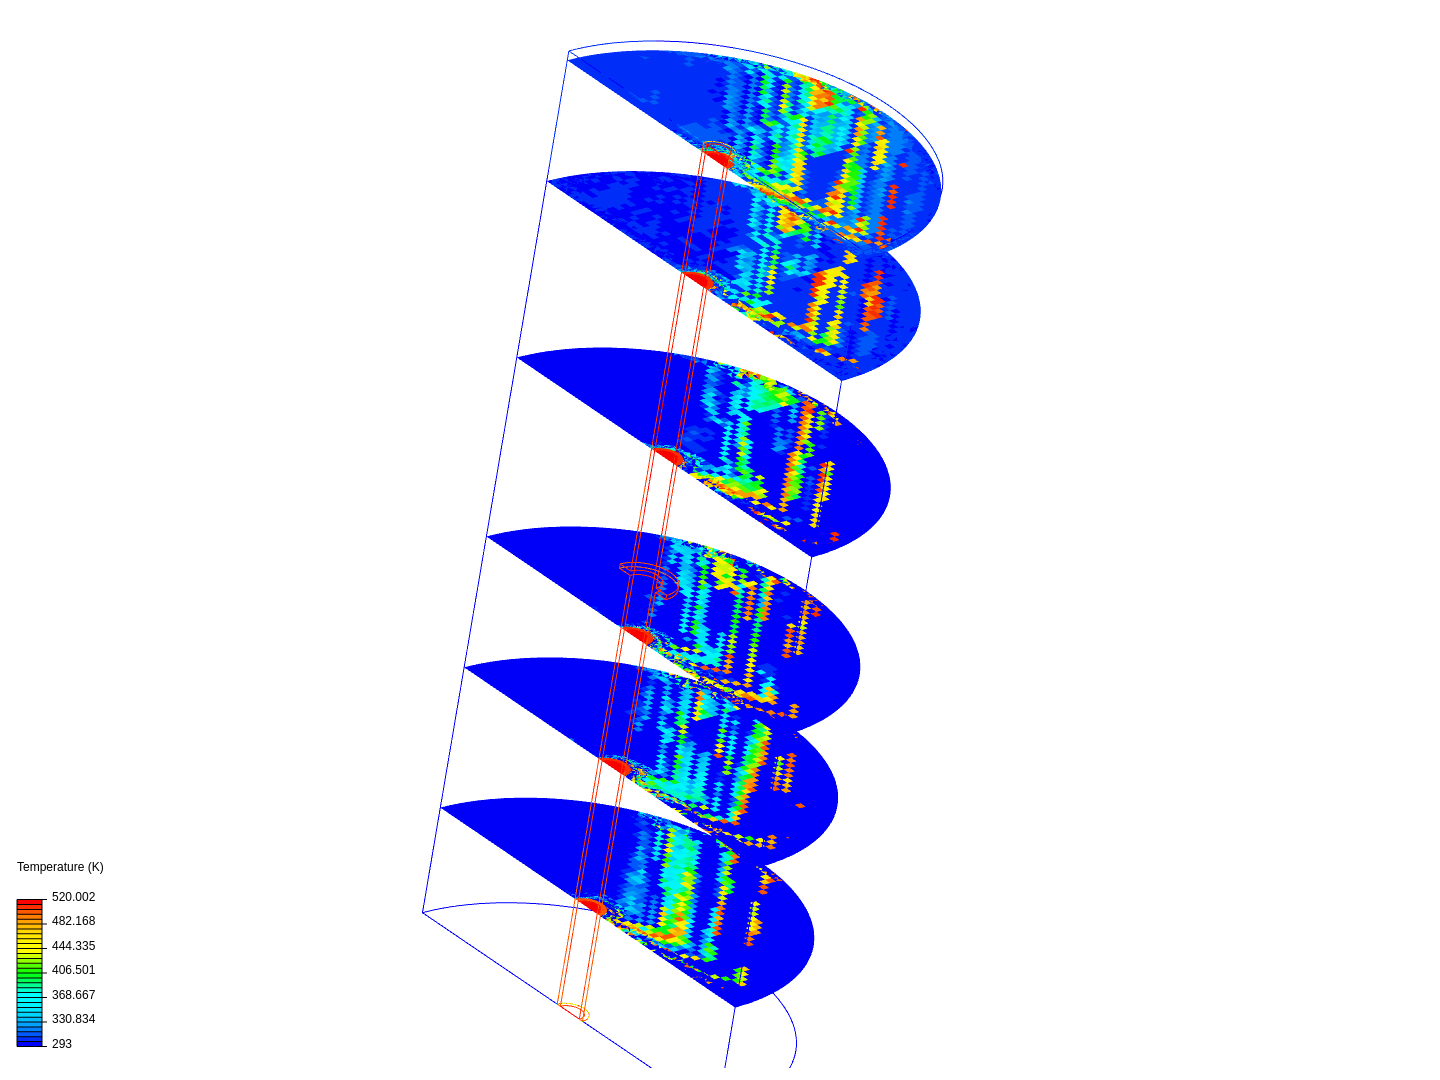 Counter-flow CHT image